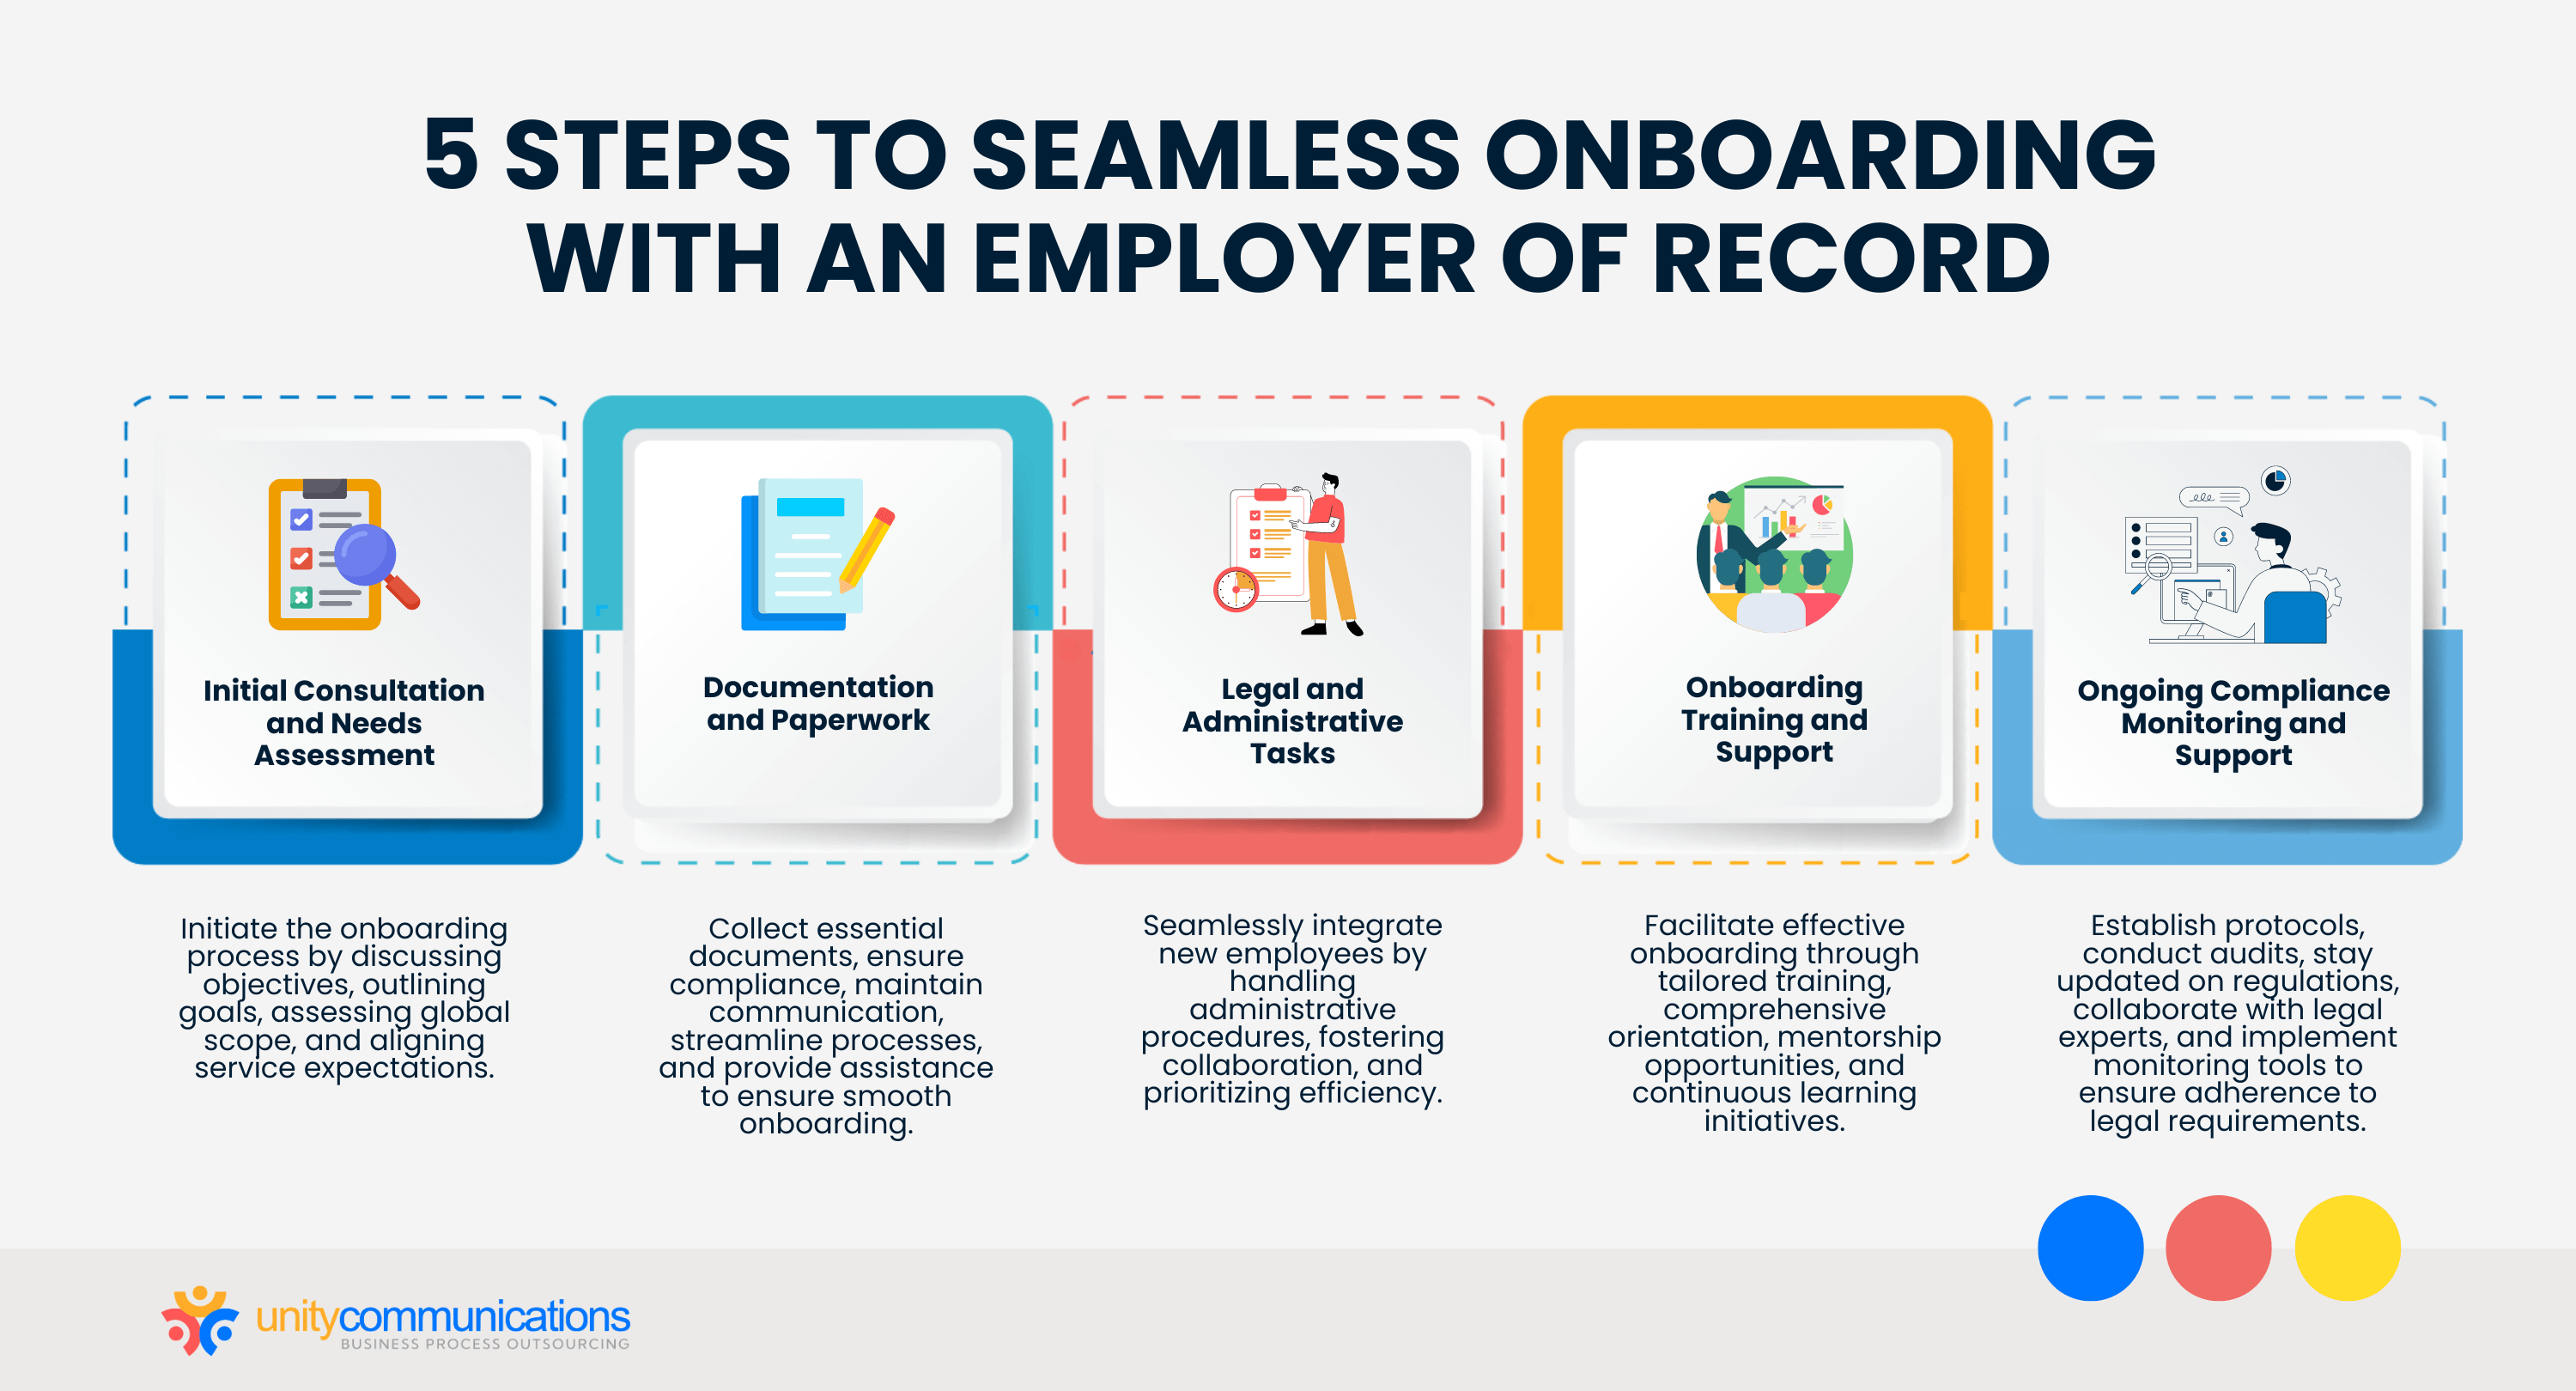 5 Steps to Seamless Onboarding With an Employer of Record